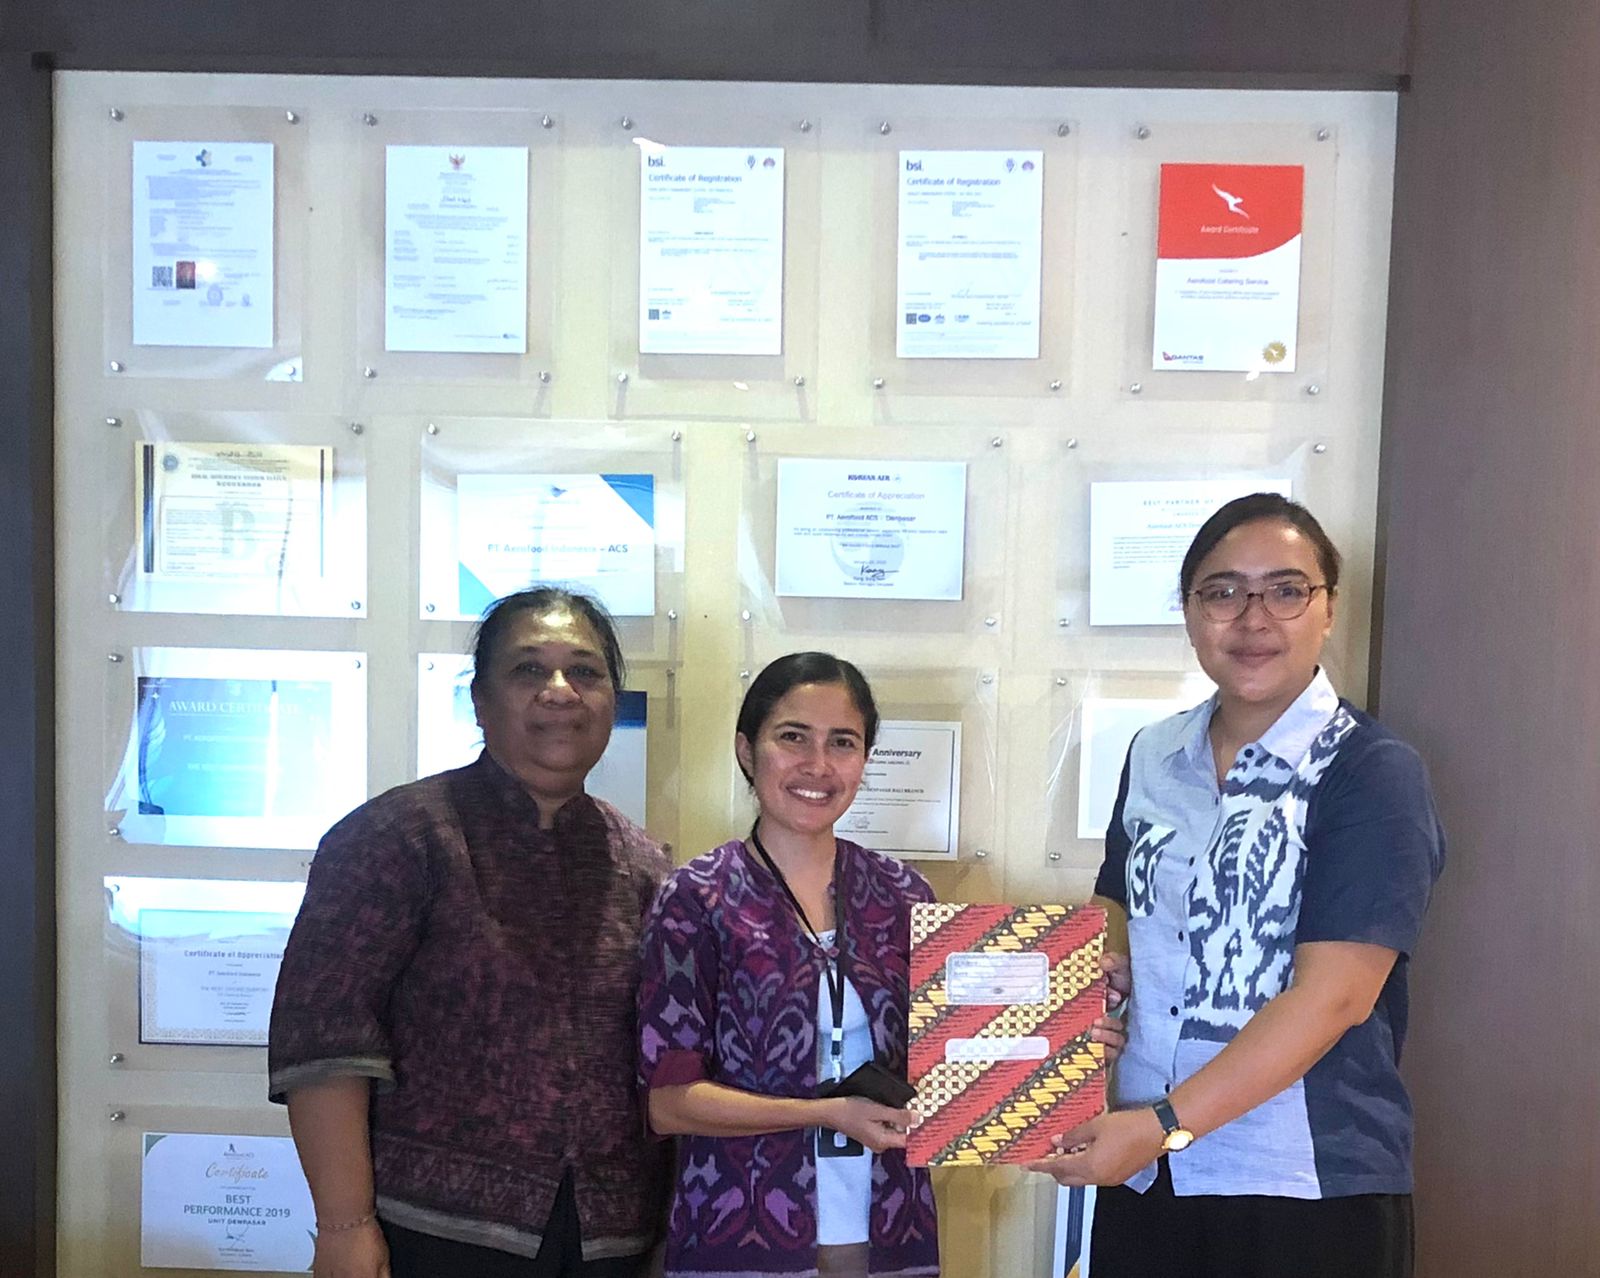 BRAVO! FTP Unud Collaborates with ACS Denpasar About MBKM Internships, Students Have the Opportunity to Add G20 Guest Handle Experience